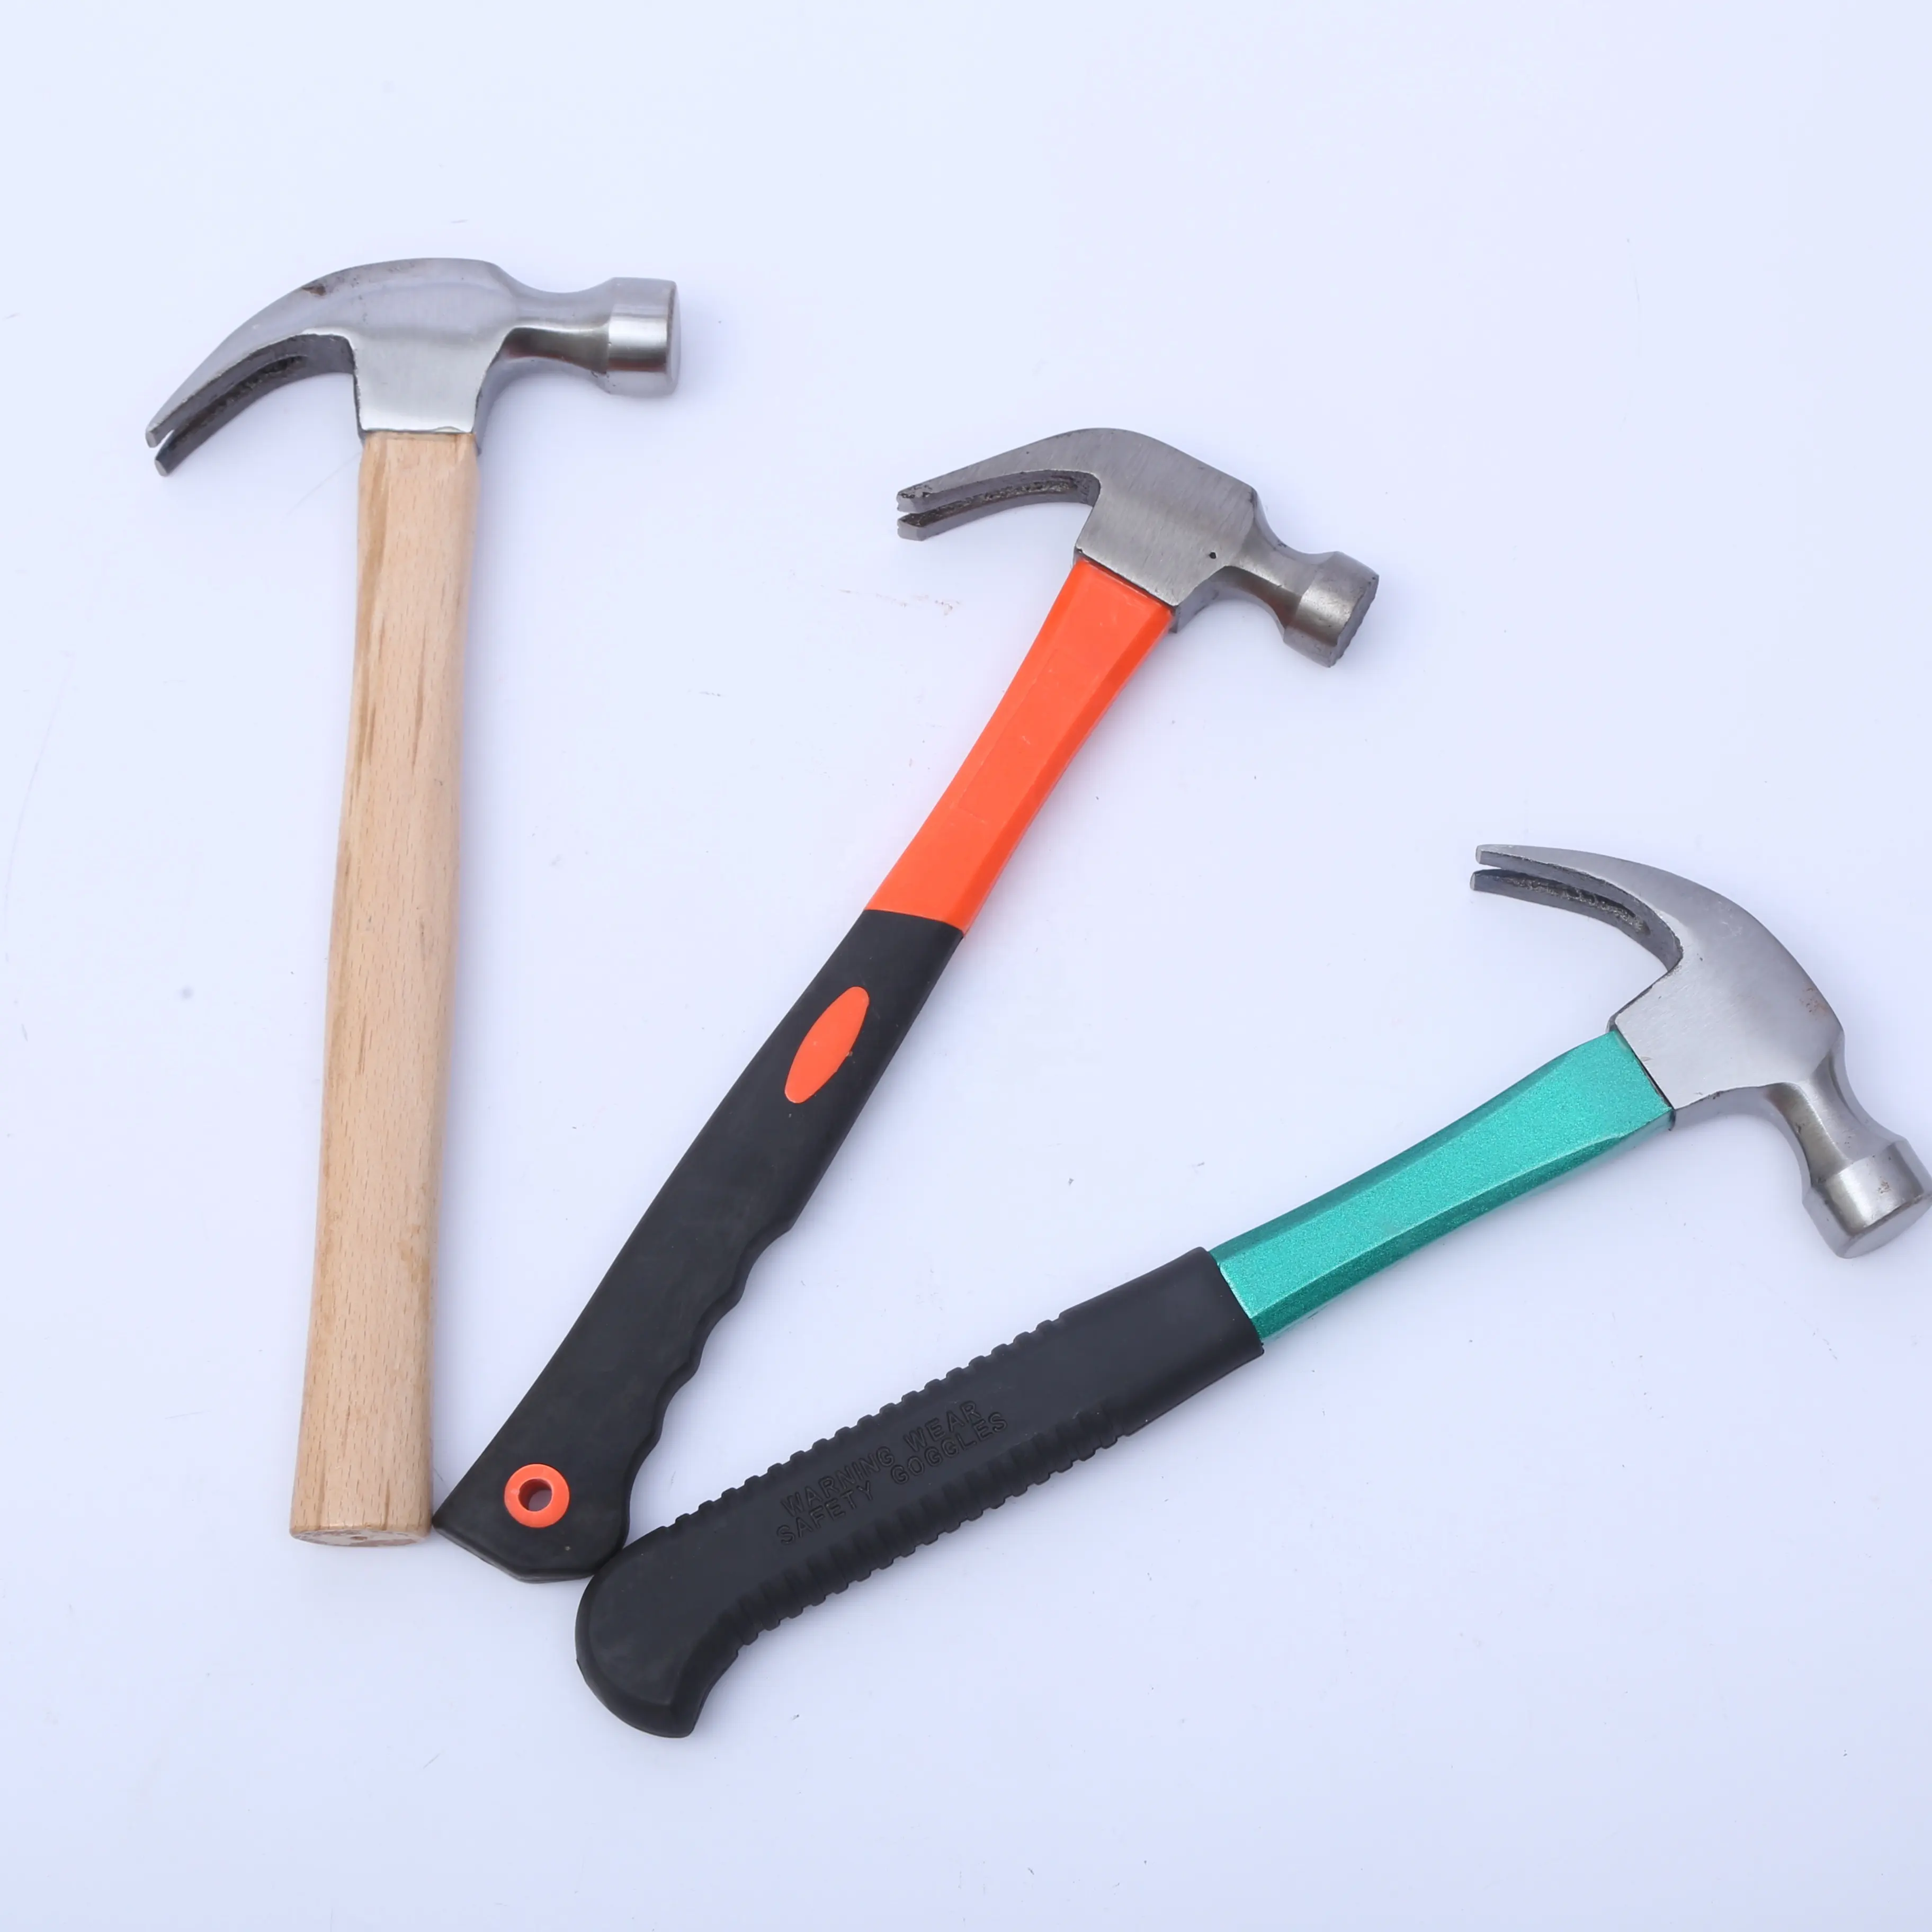 Claw hammer with wooden/fiberglass/plastic handle